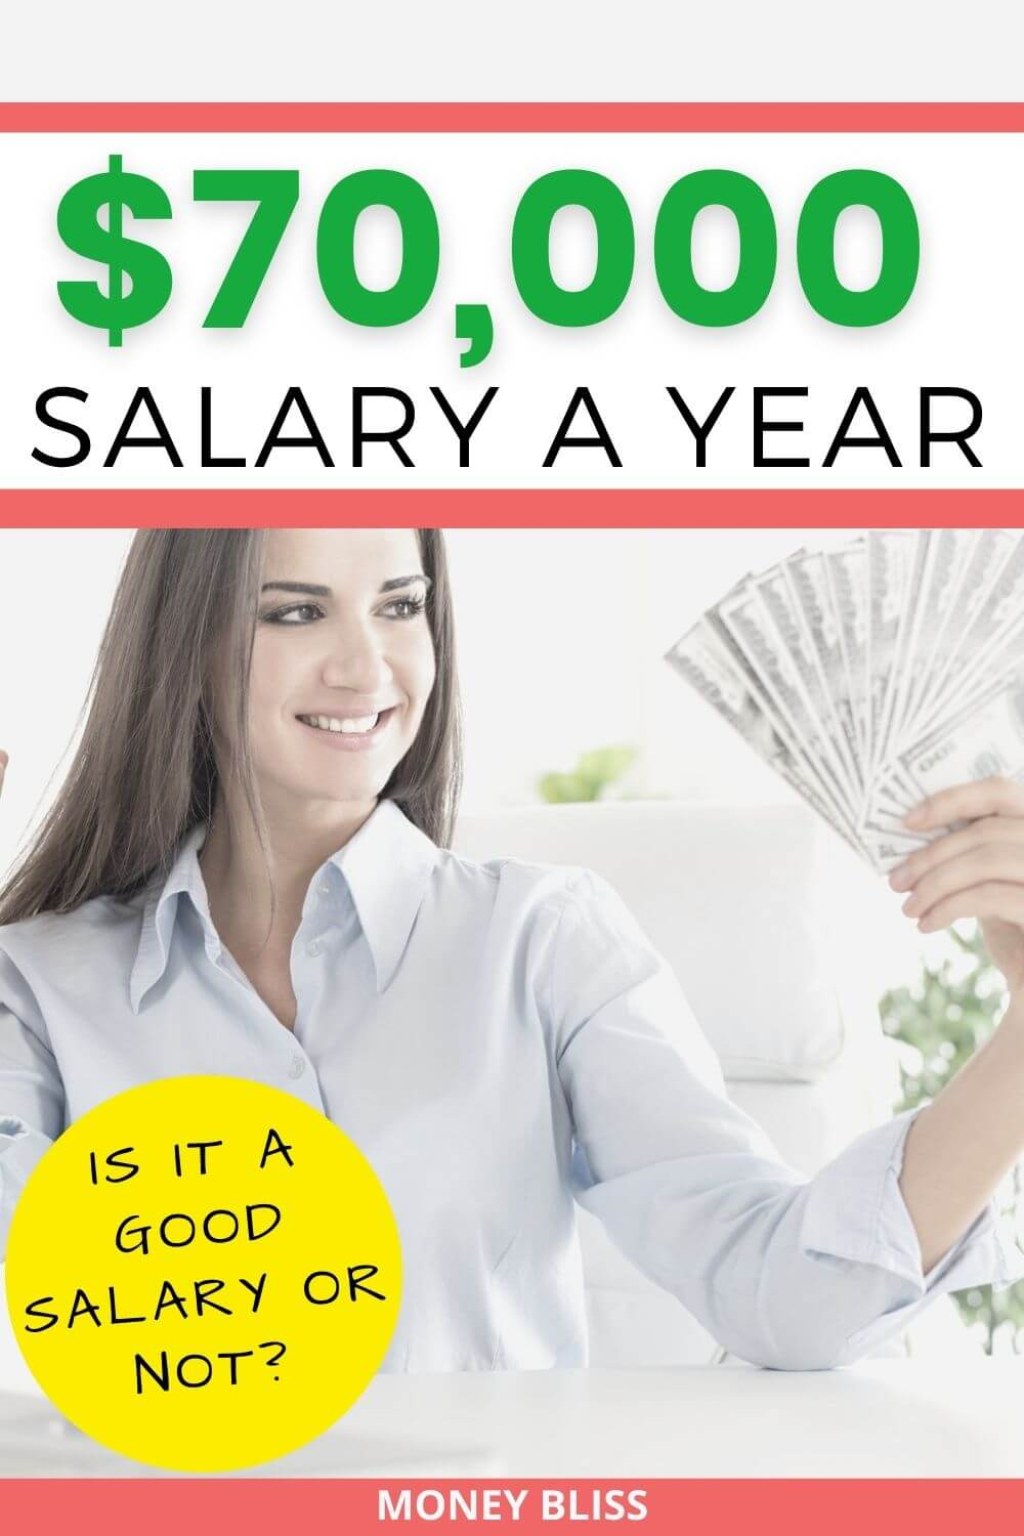 budgeting 70000 salary - $ a Year is How Much an Hour? Good Salary? - Money Bliss